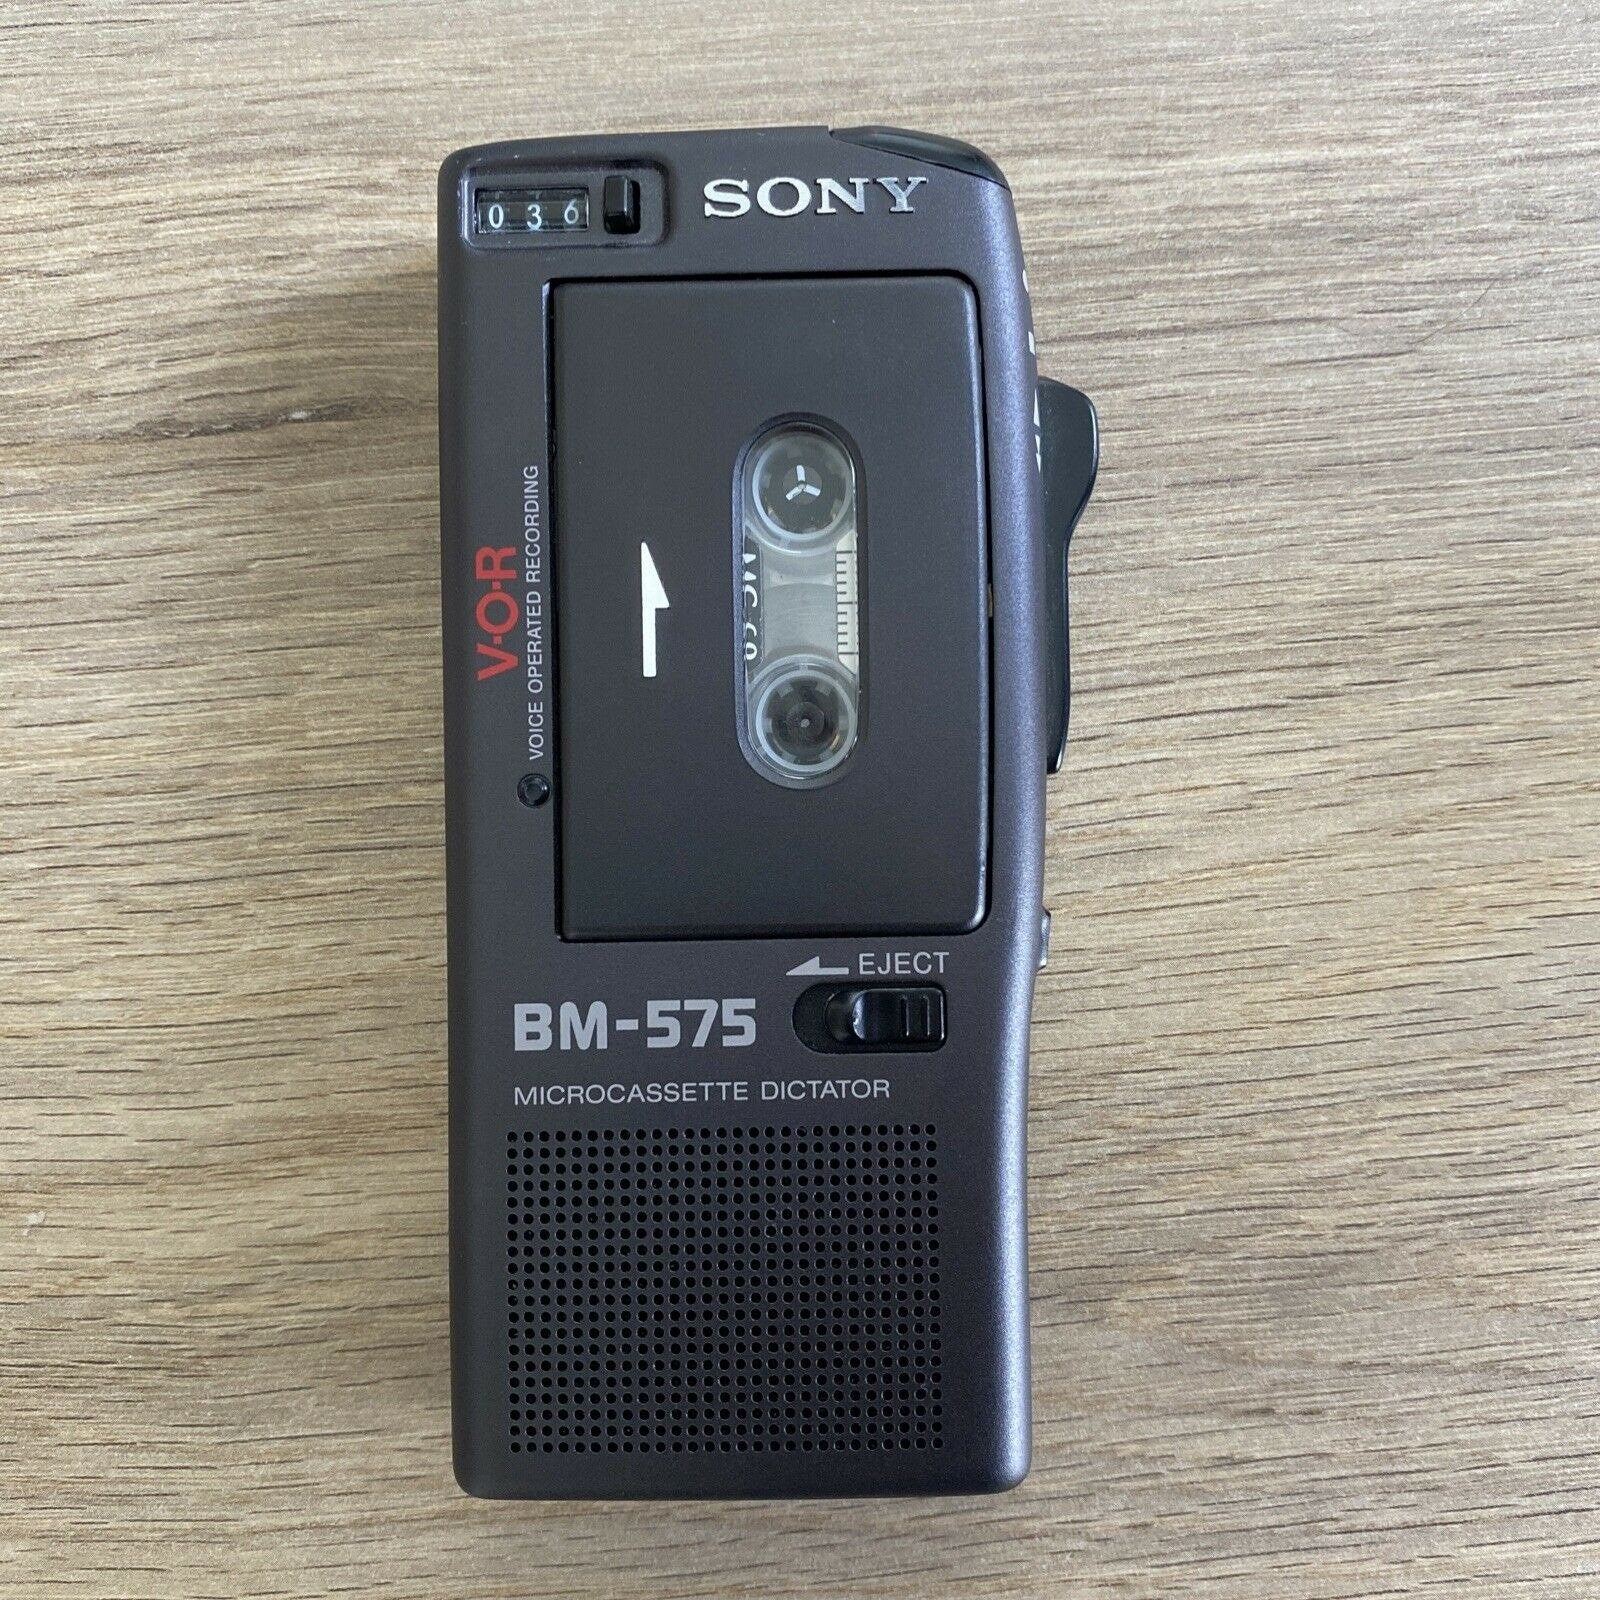 Sony BM-575 Voice-Activated Microcassette Recorder